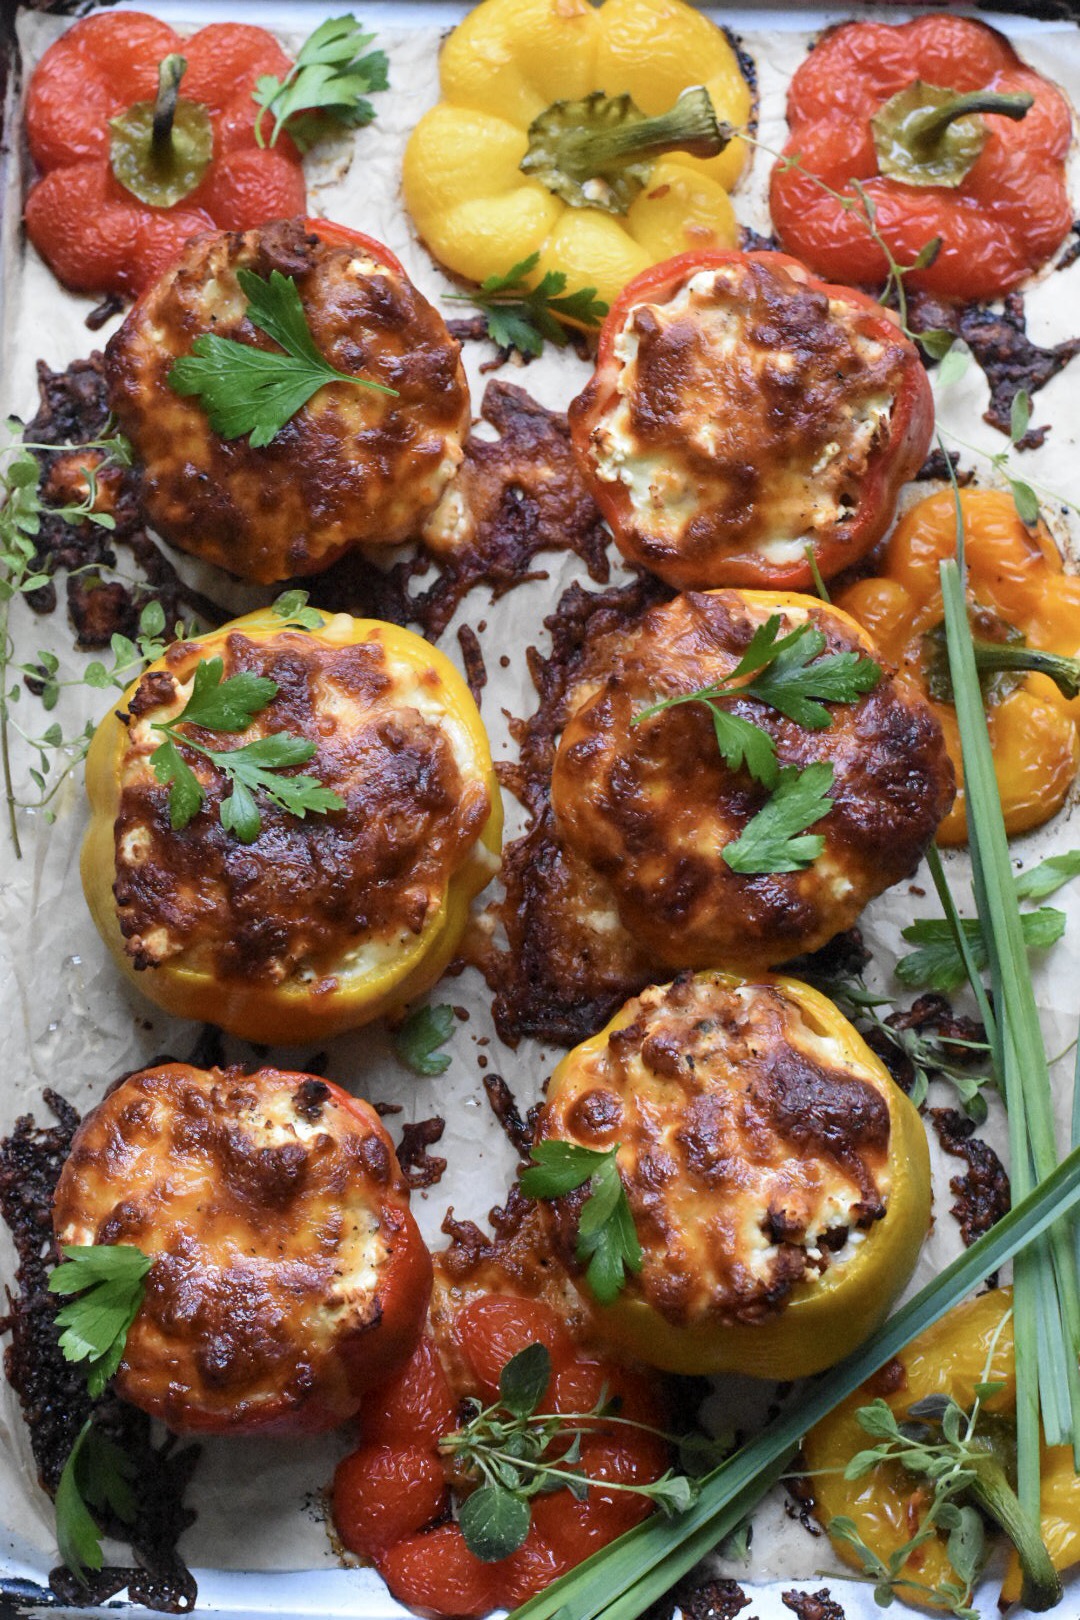 6 stuffed peppers with melty and browned cheese on top